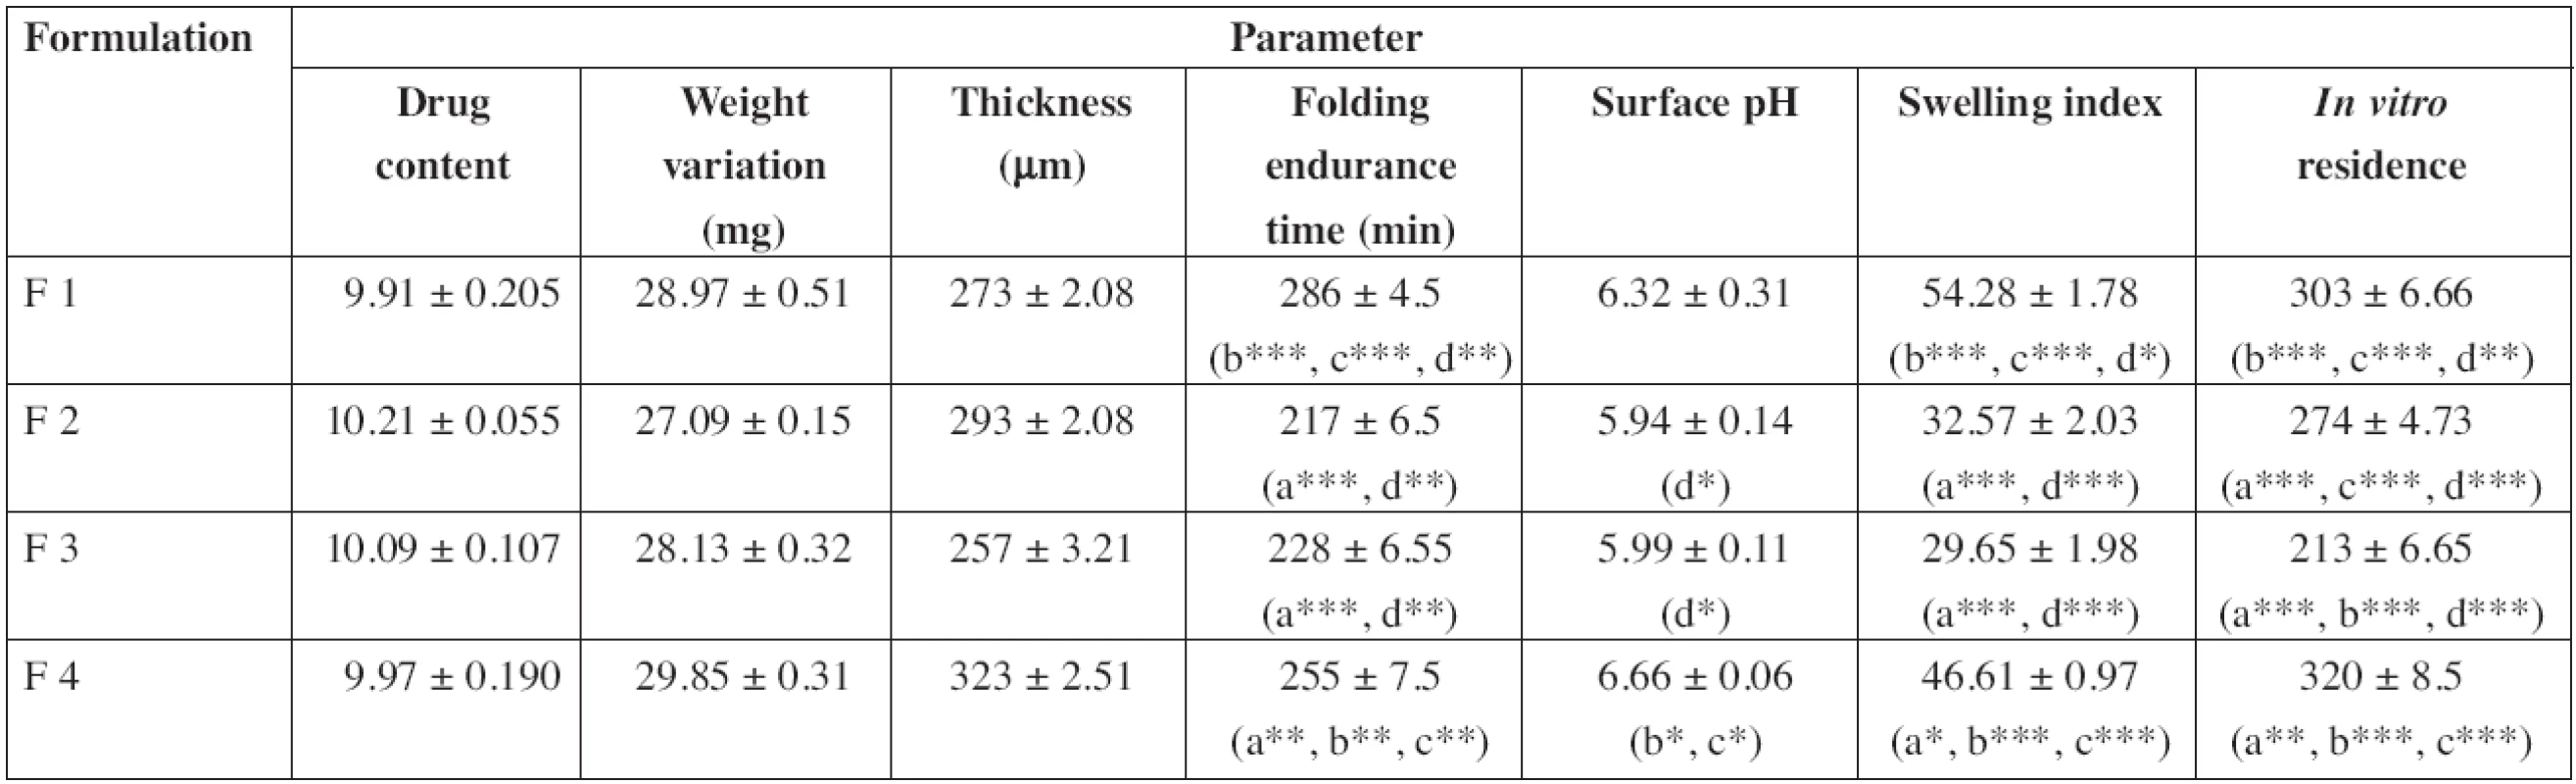 Physicochemical evaluation of diltiazem buccal patches